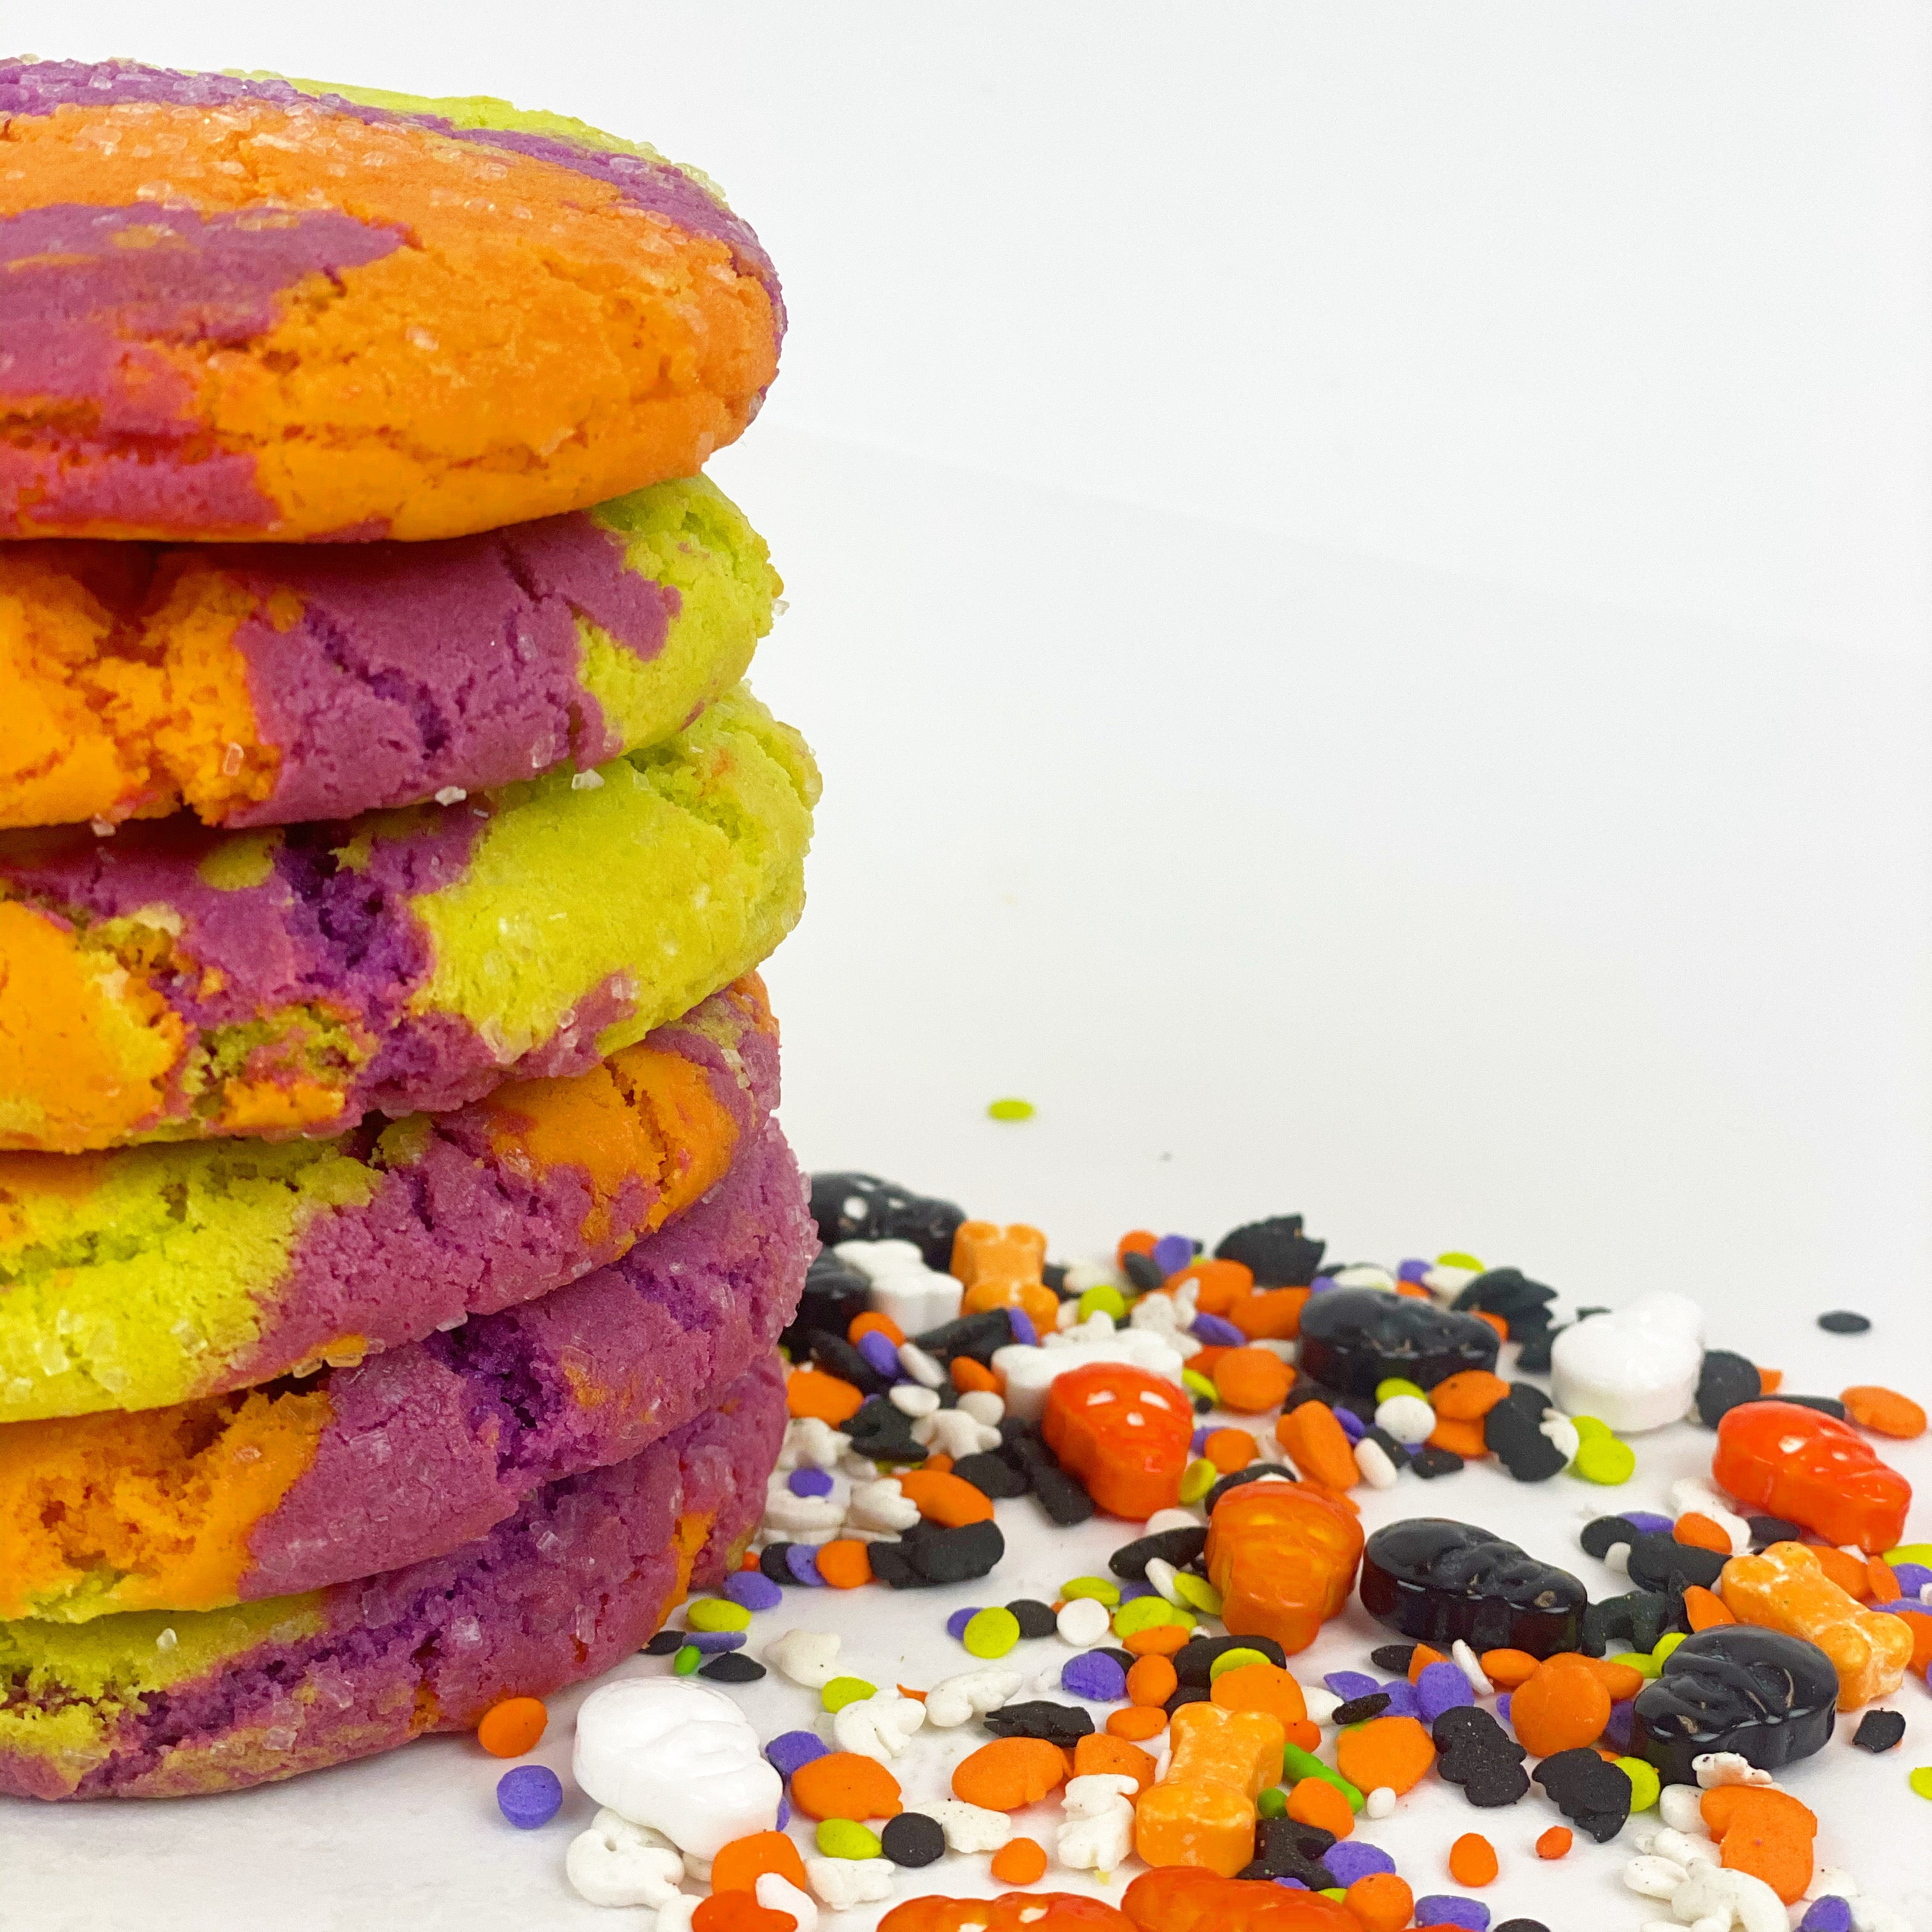 Our delicious sugar cookie dyed for Halloween in 3 colors...orange, purple and lime green ... baked with crystal sugar on top